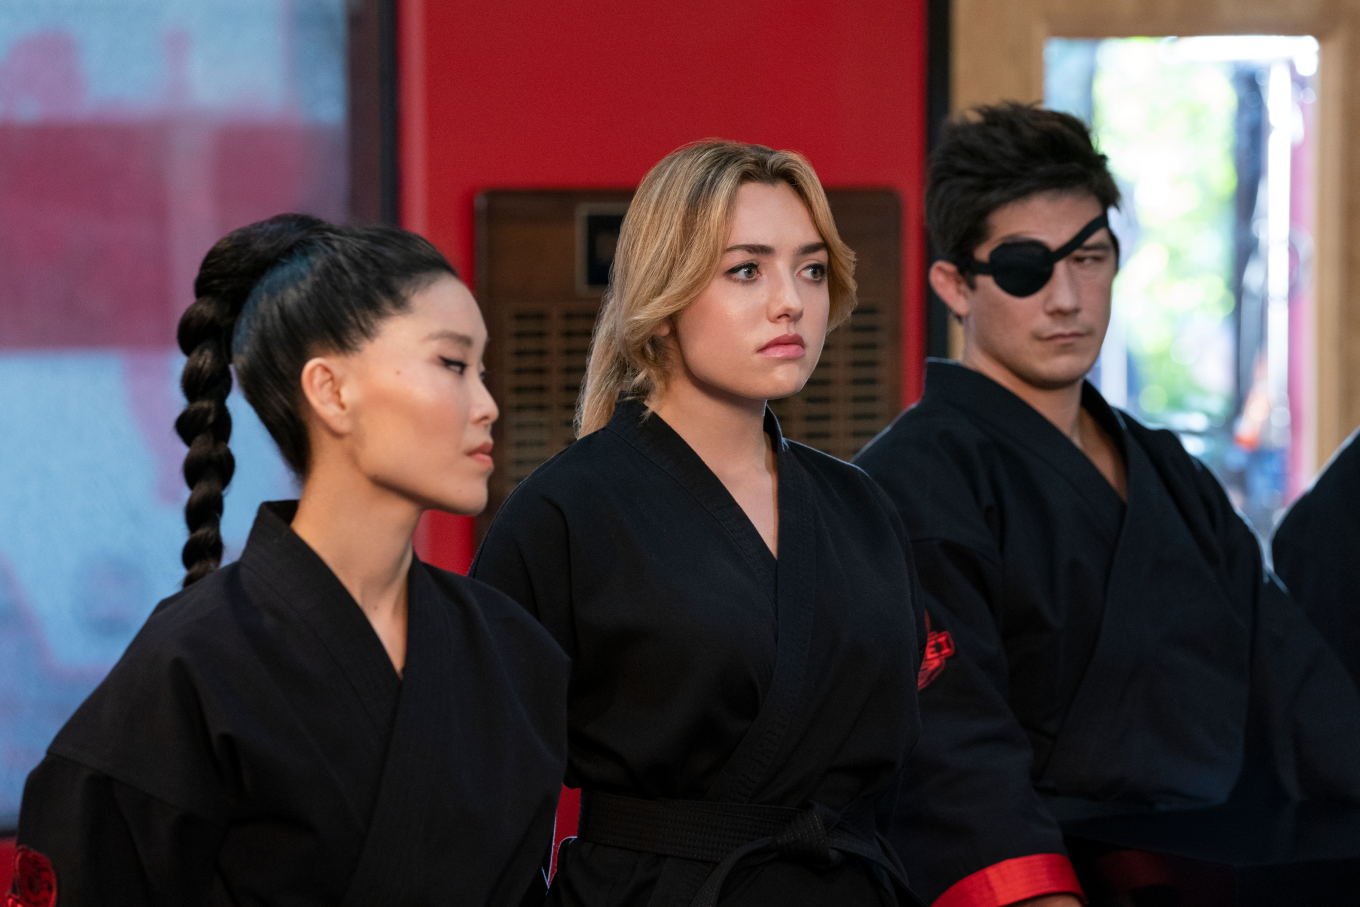 Cobra Kai Season 6 The Final Chapter Unveiled - What Lies Ahead for the Miyagiverse.